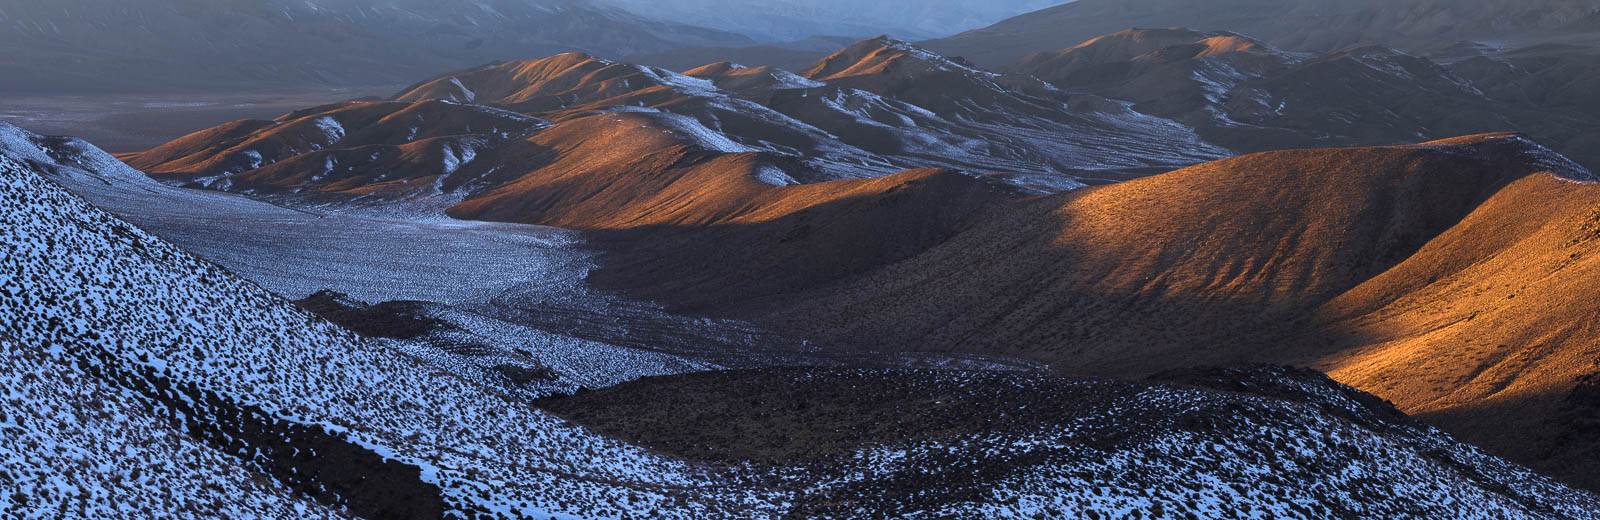 Time, aguereberry point, blue, california, death valley national park, panorama, red, snow, sunset, mojave desert